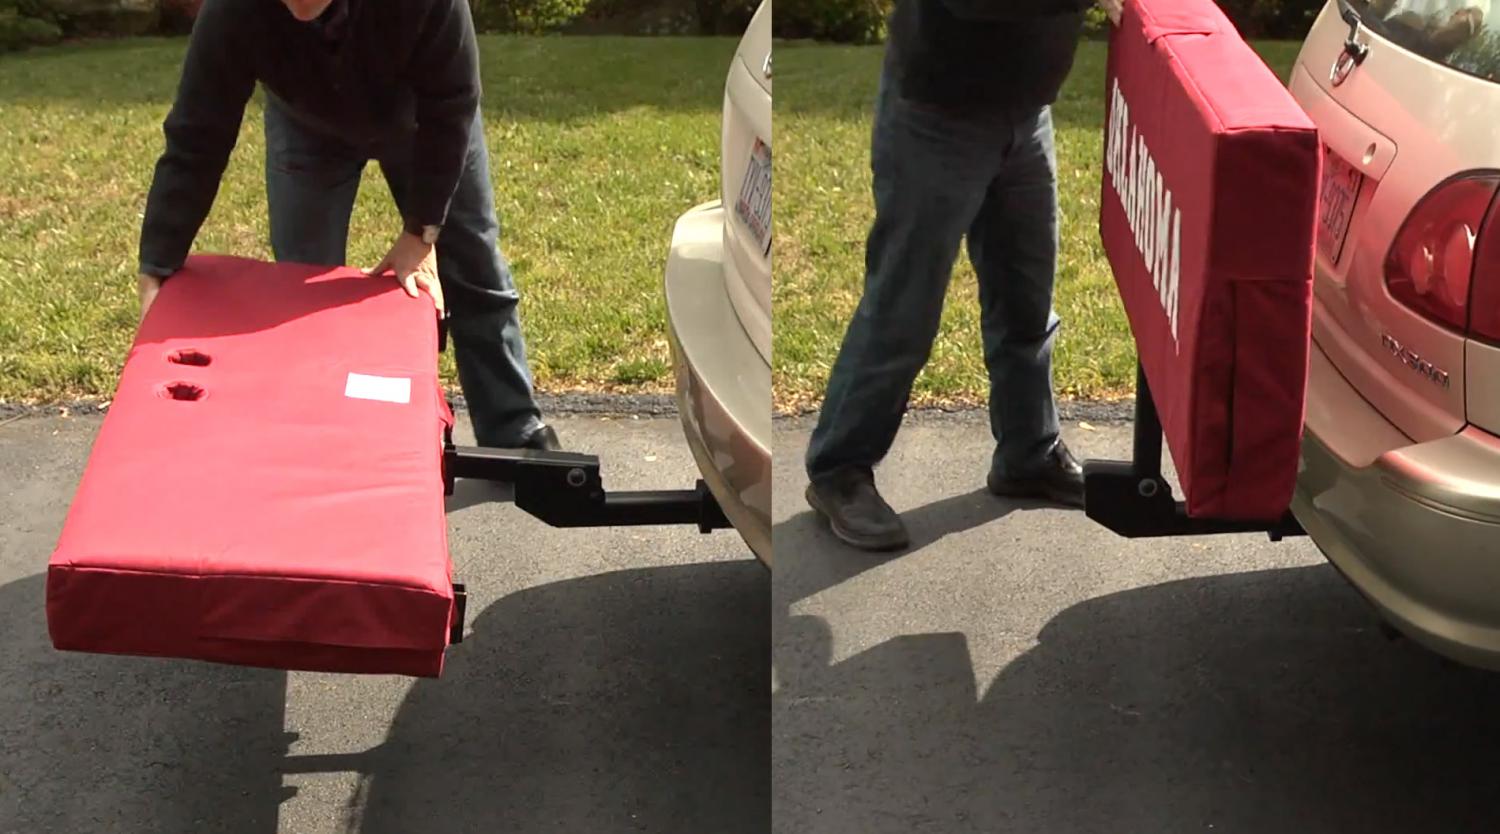 This Truck Hitch Cargo Holder Doubles As Seating For Tailgating Or Camping